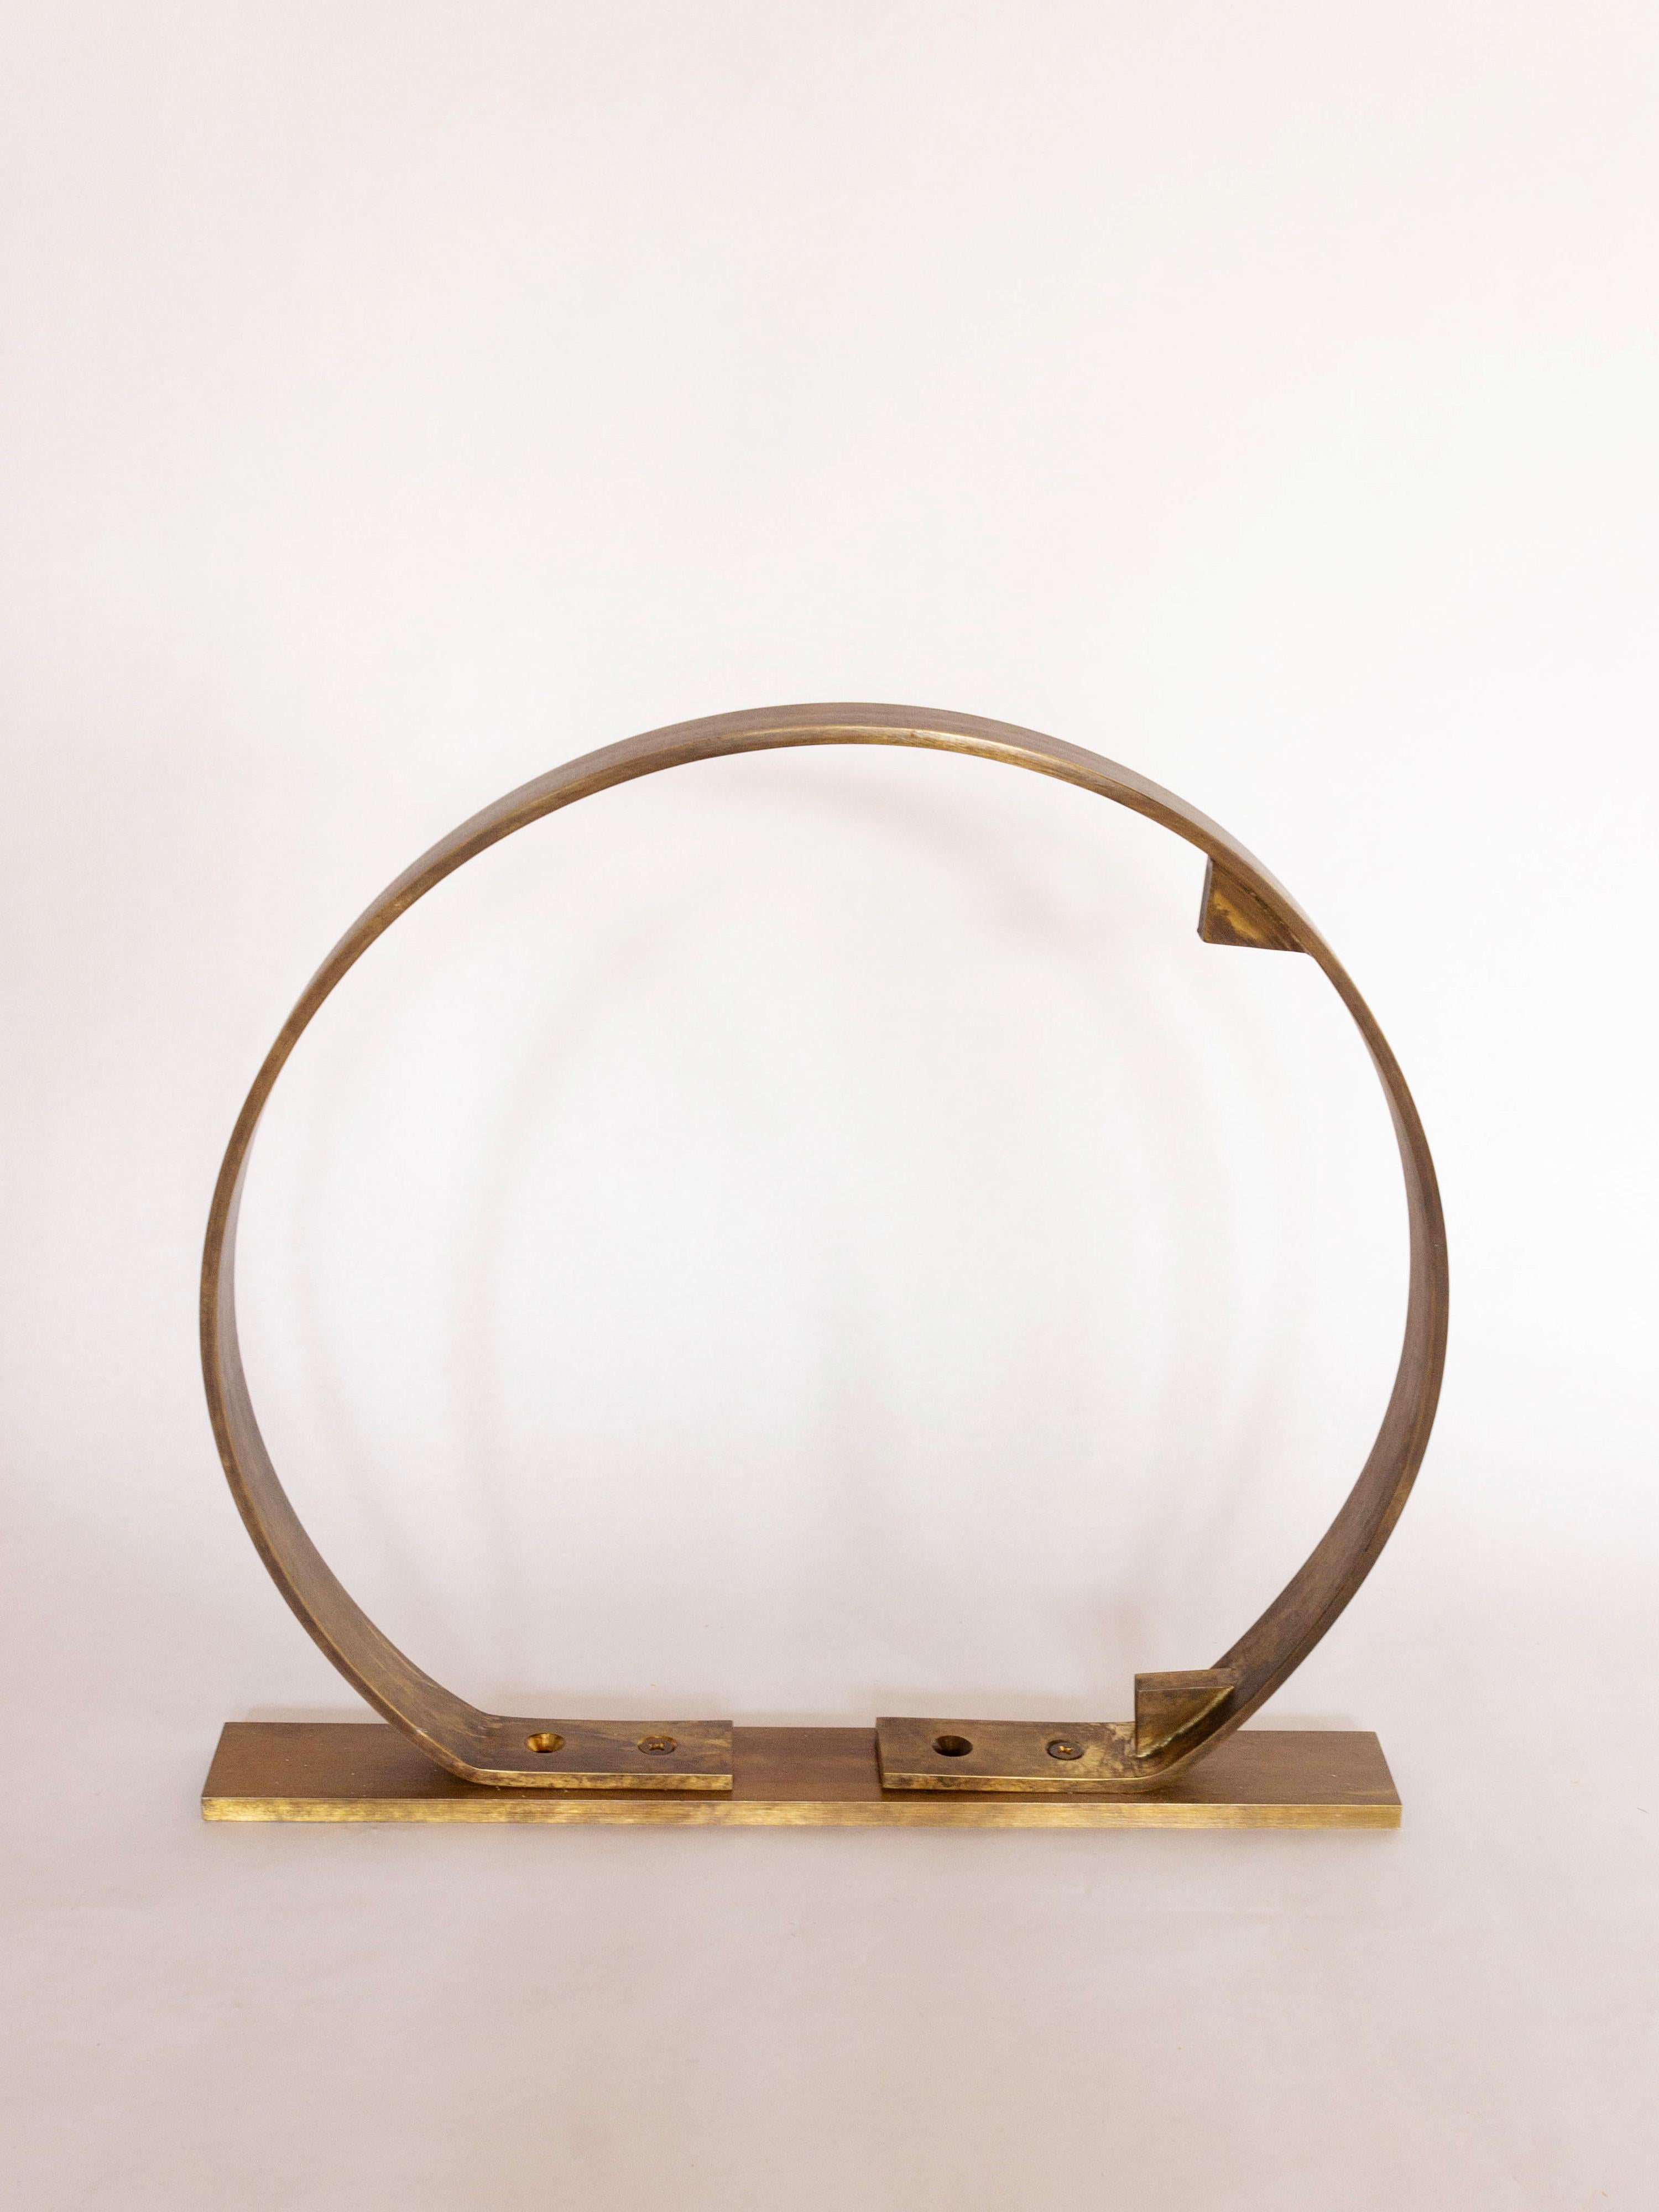 Pair of modern custom made circular brushed brass shelf brackets. 

Image shown with glass shelving for reference only 
***glass shelves are not included***